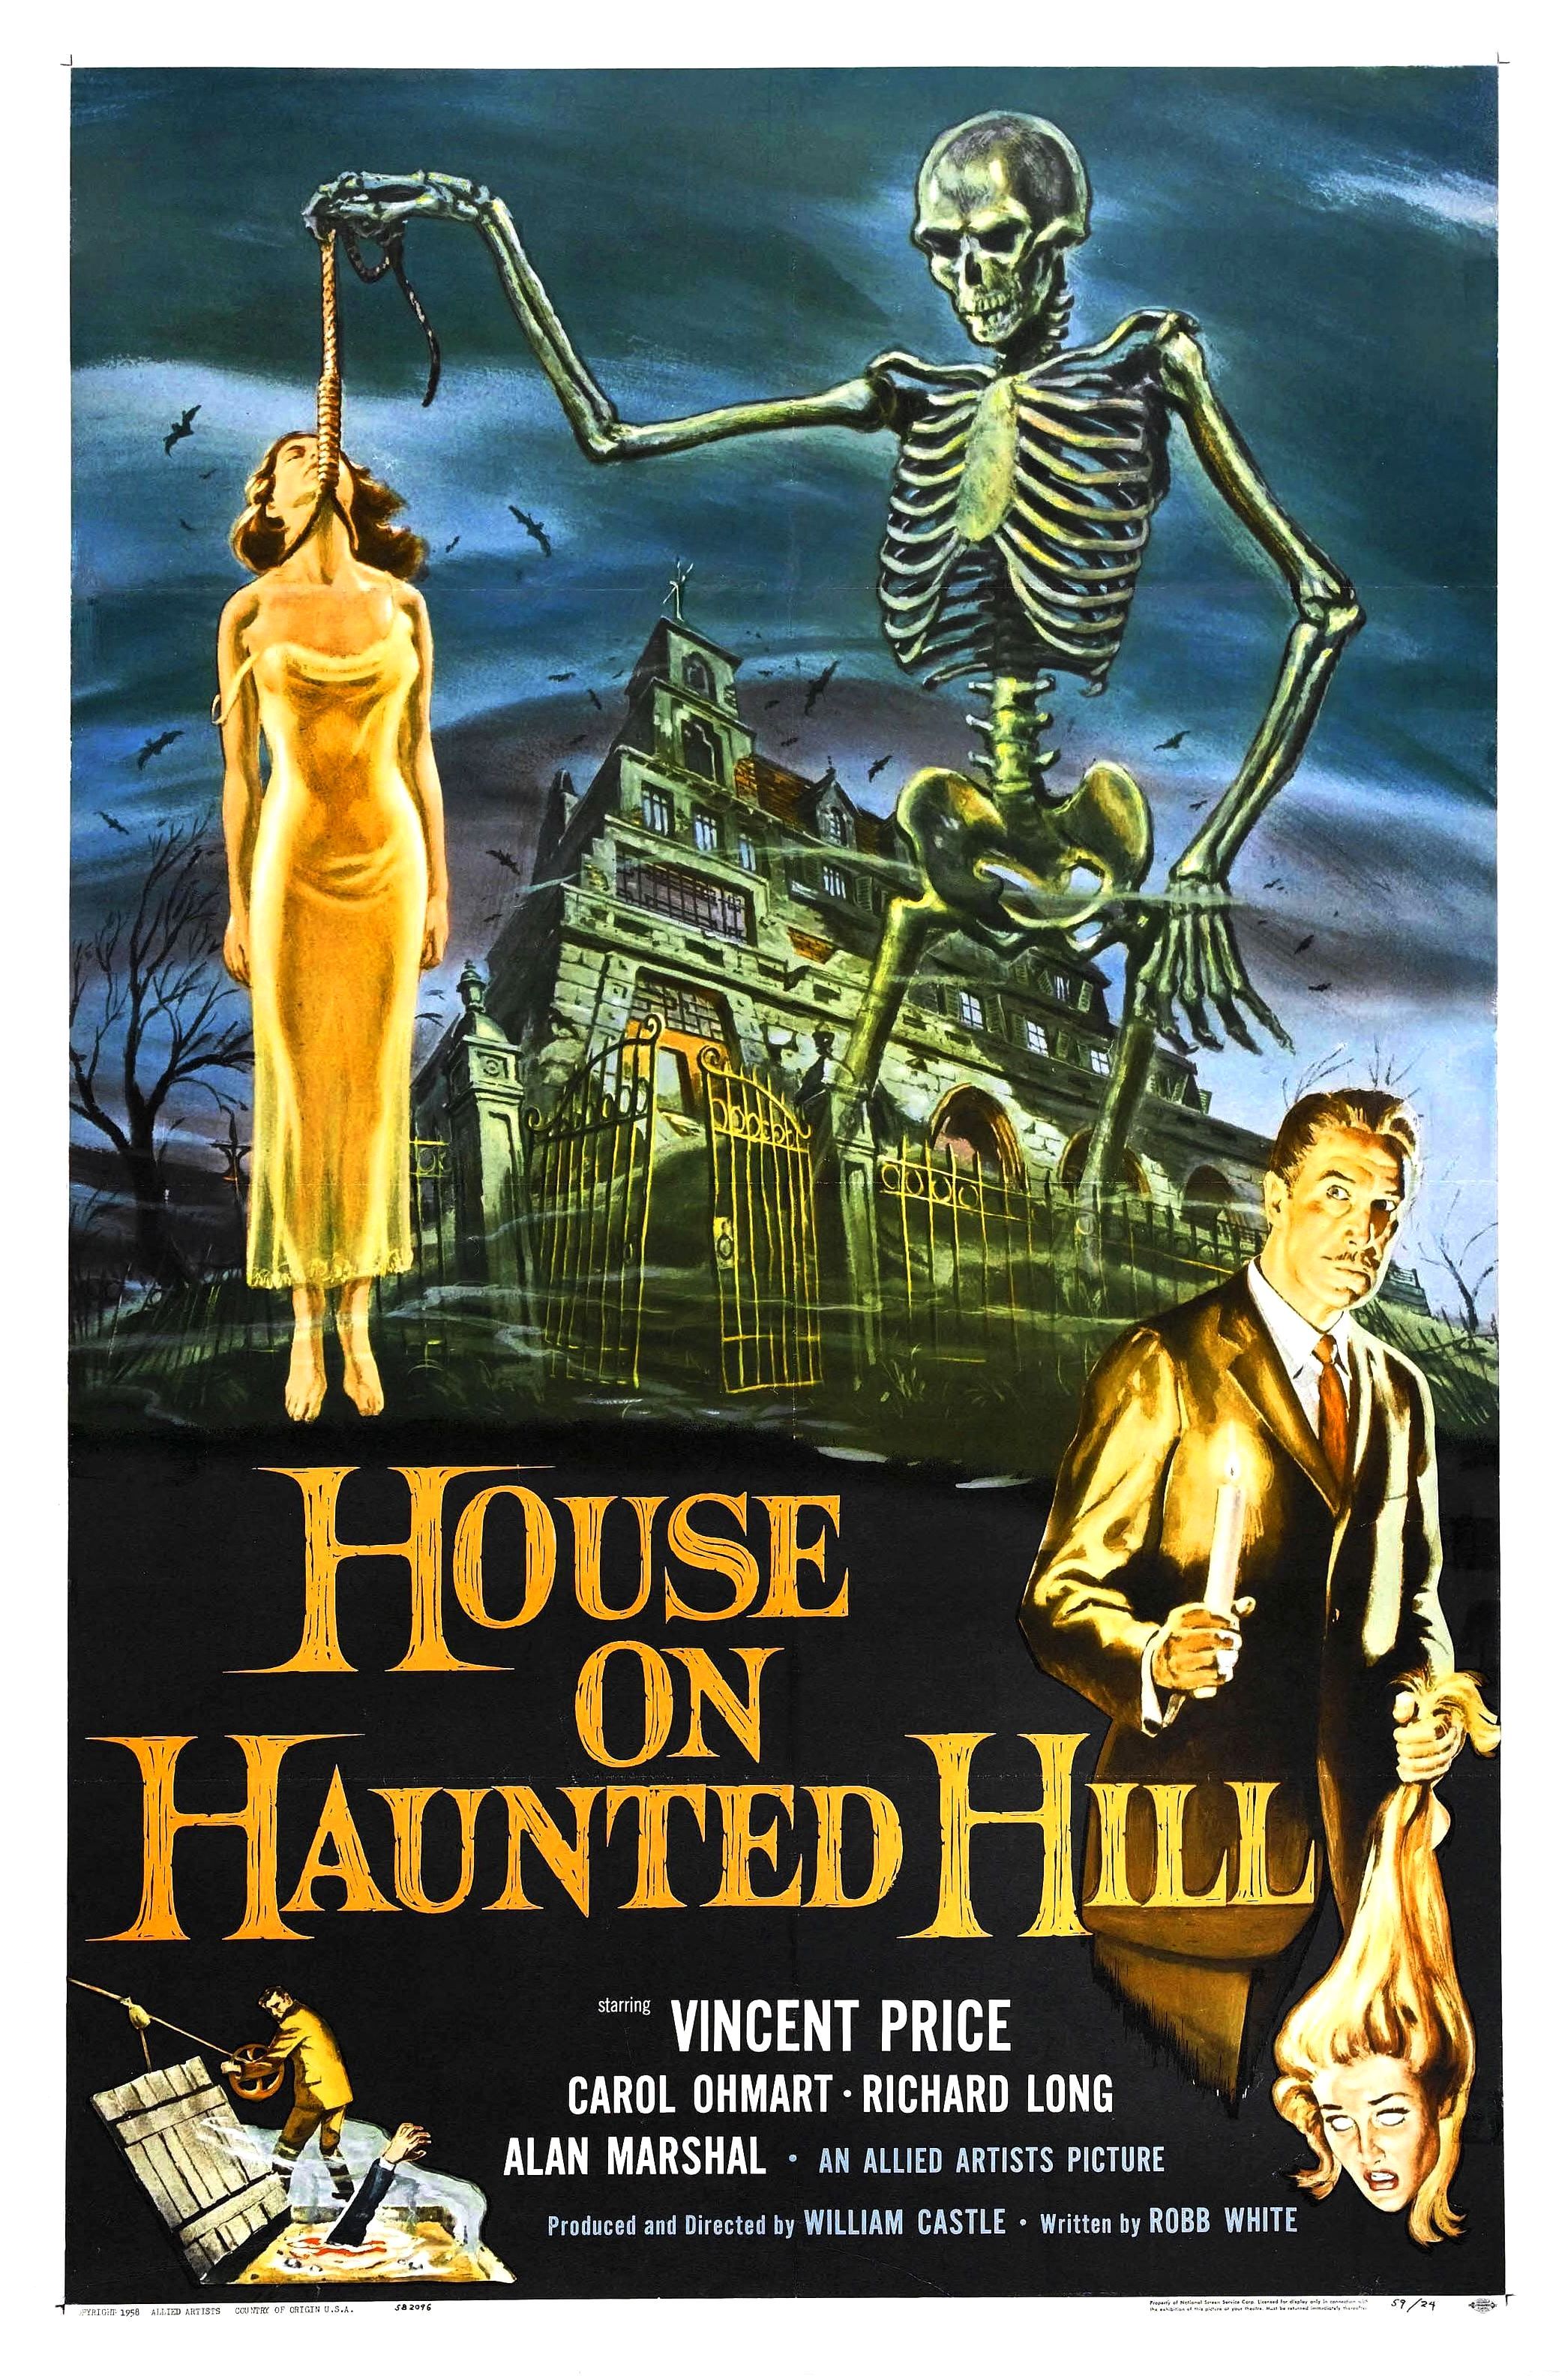 Movie poster for 1959's The House on Haunted Hill